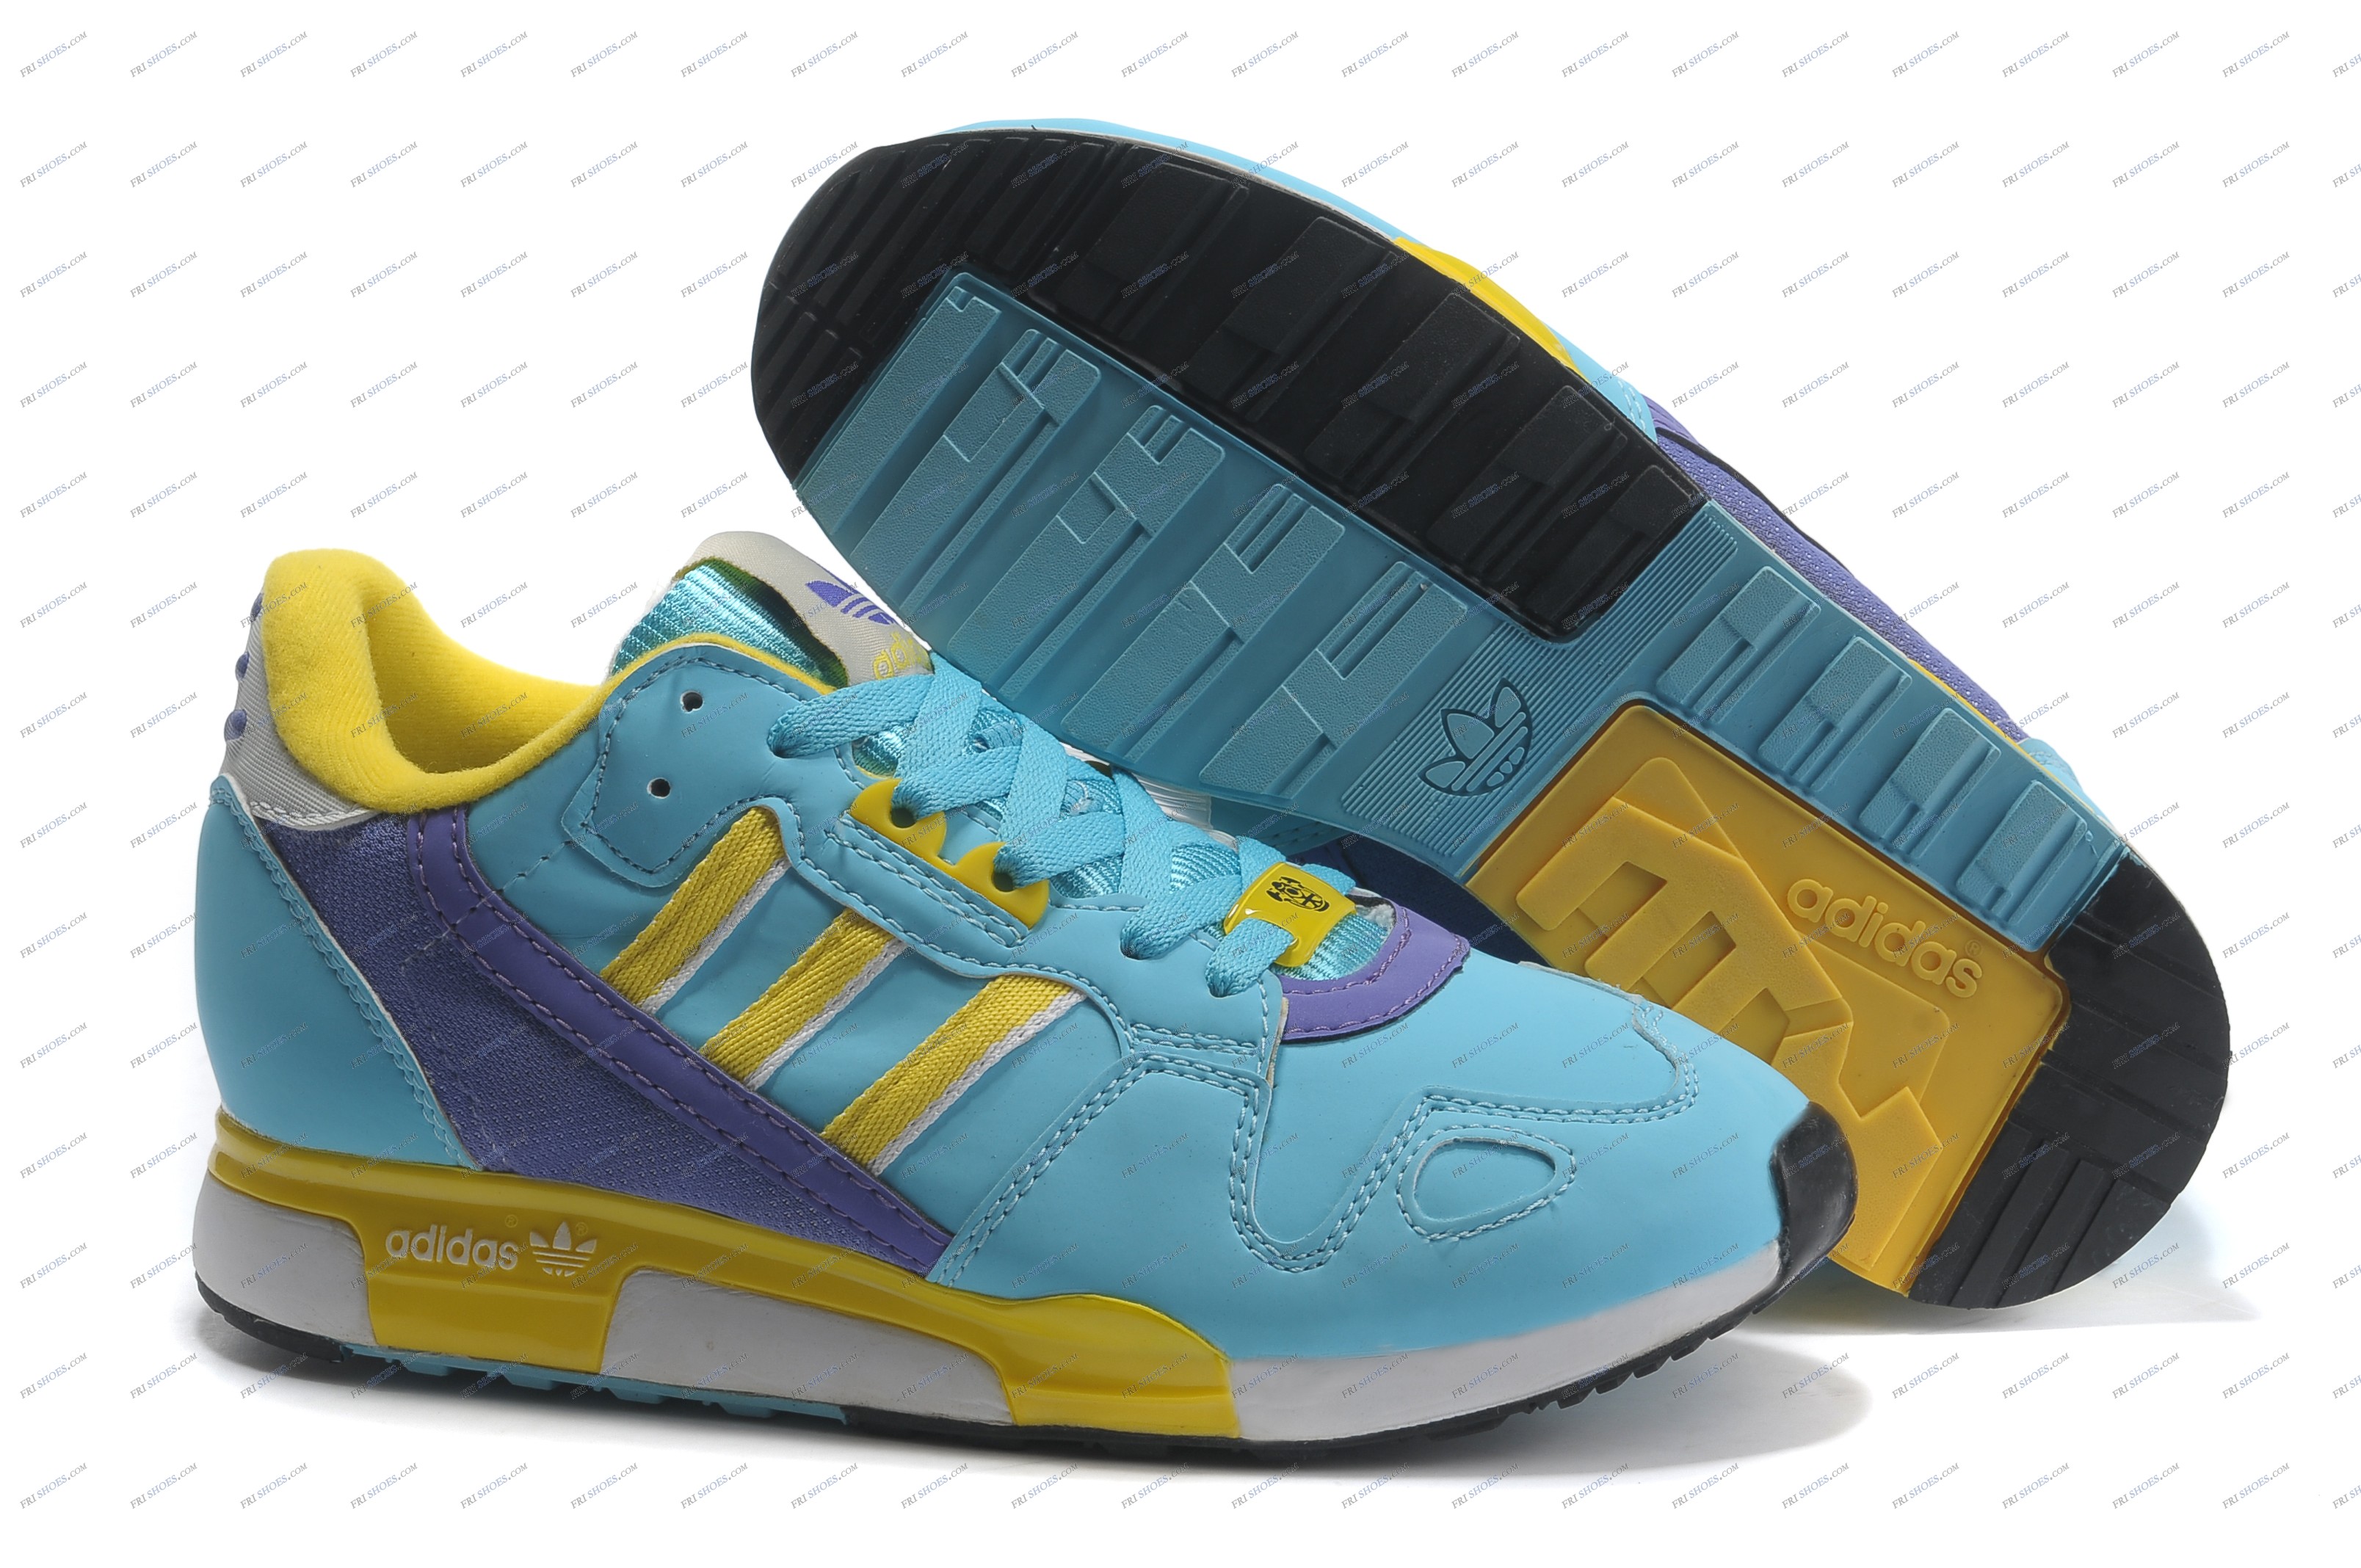 adidas zx 800 trainers